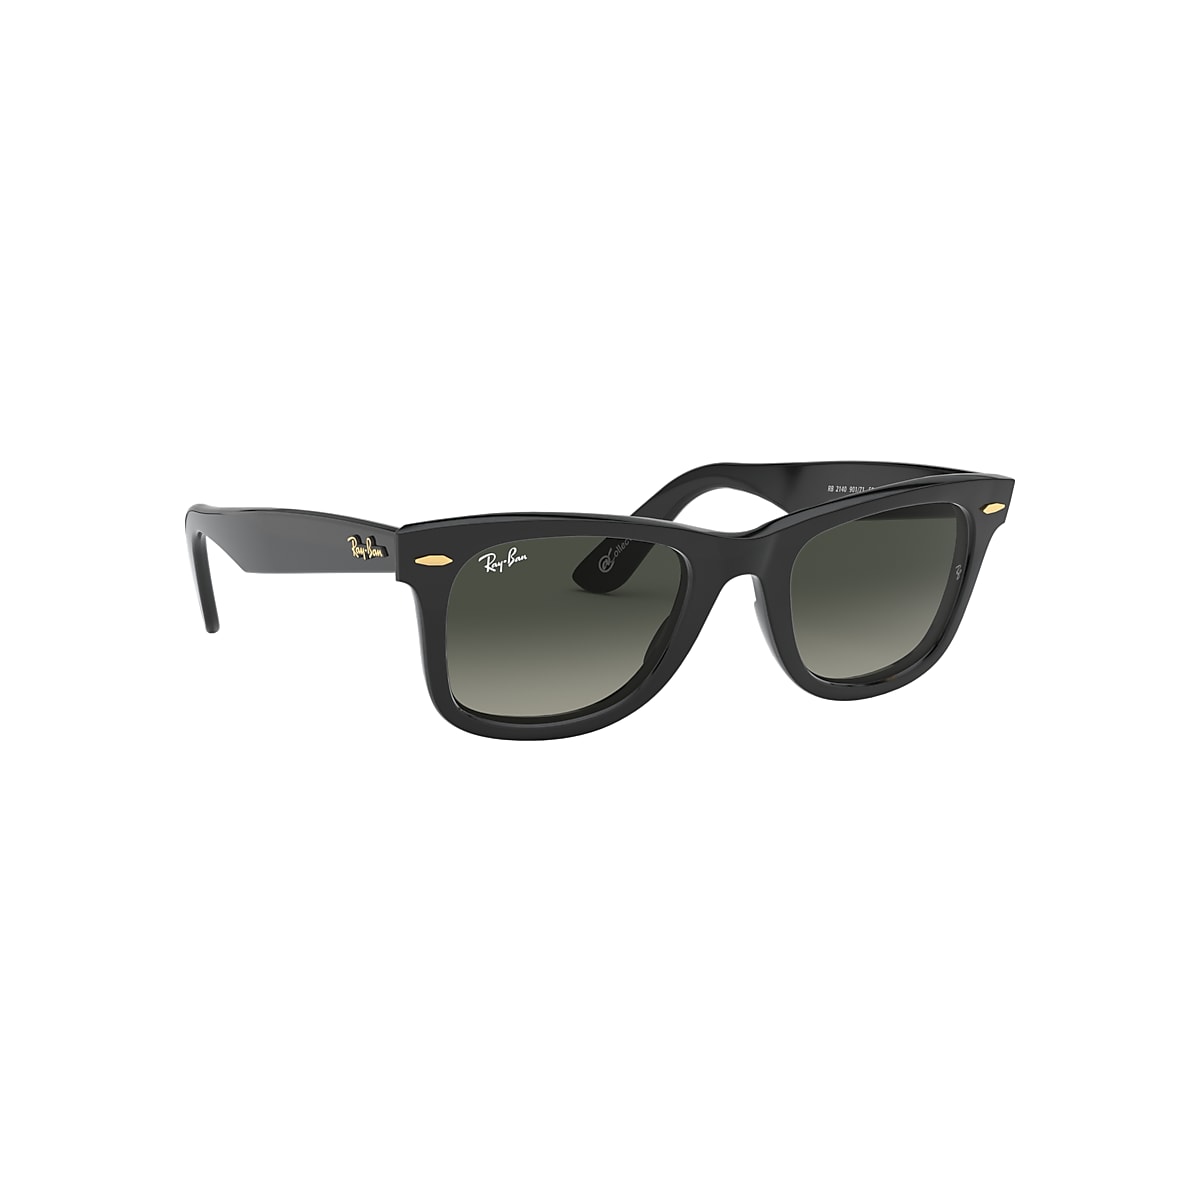 ORIGINAL @COLLECTION Sunglasses in Black and Grey - RB2140 | Ray- Ban® US